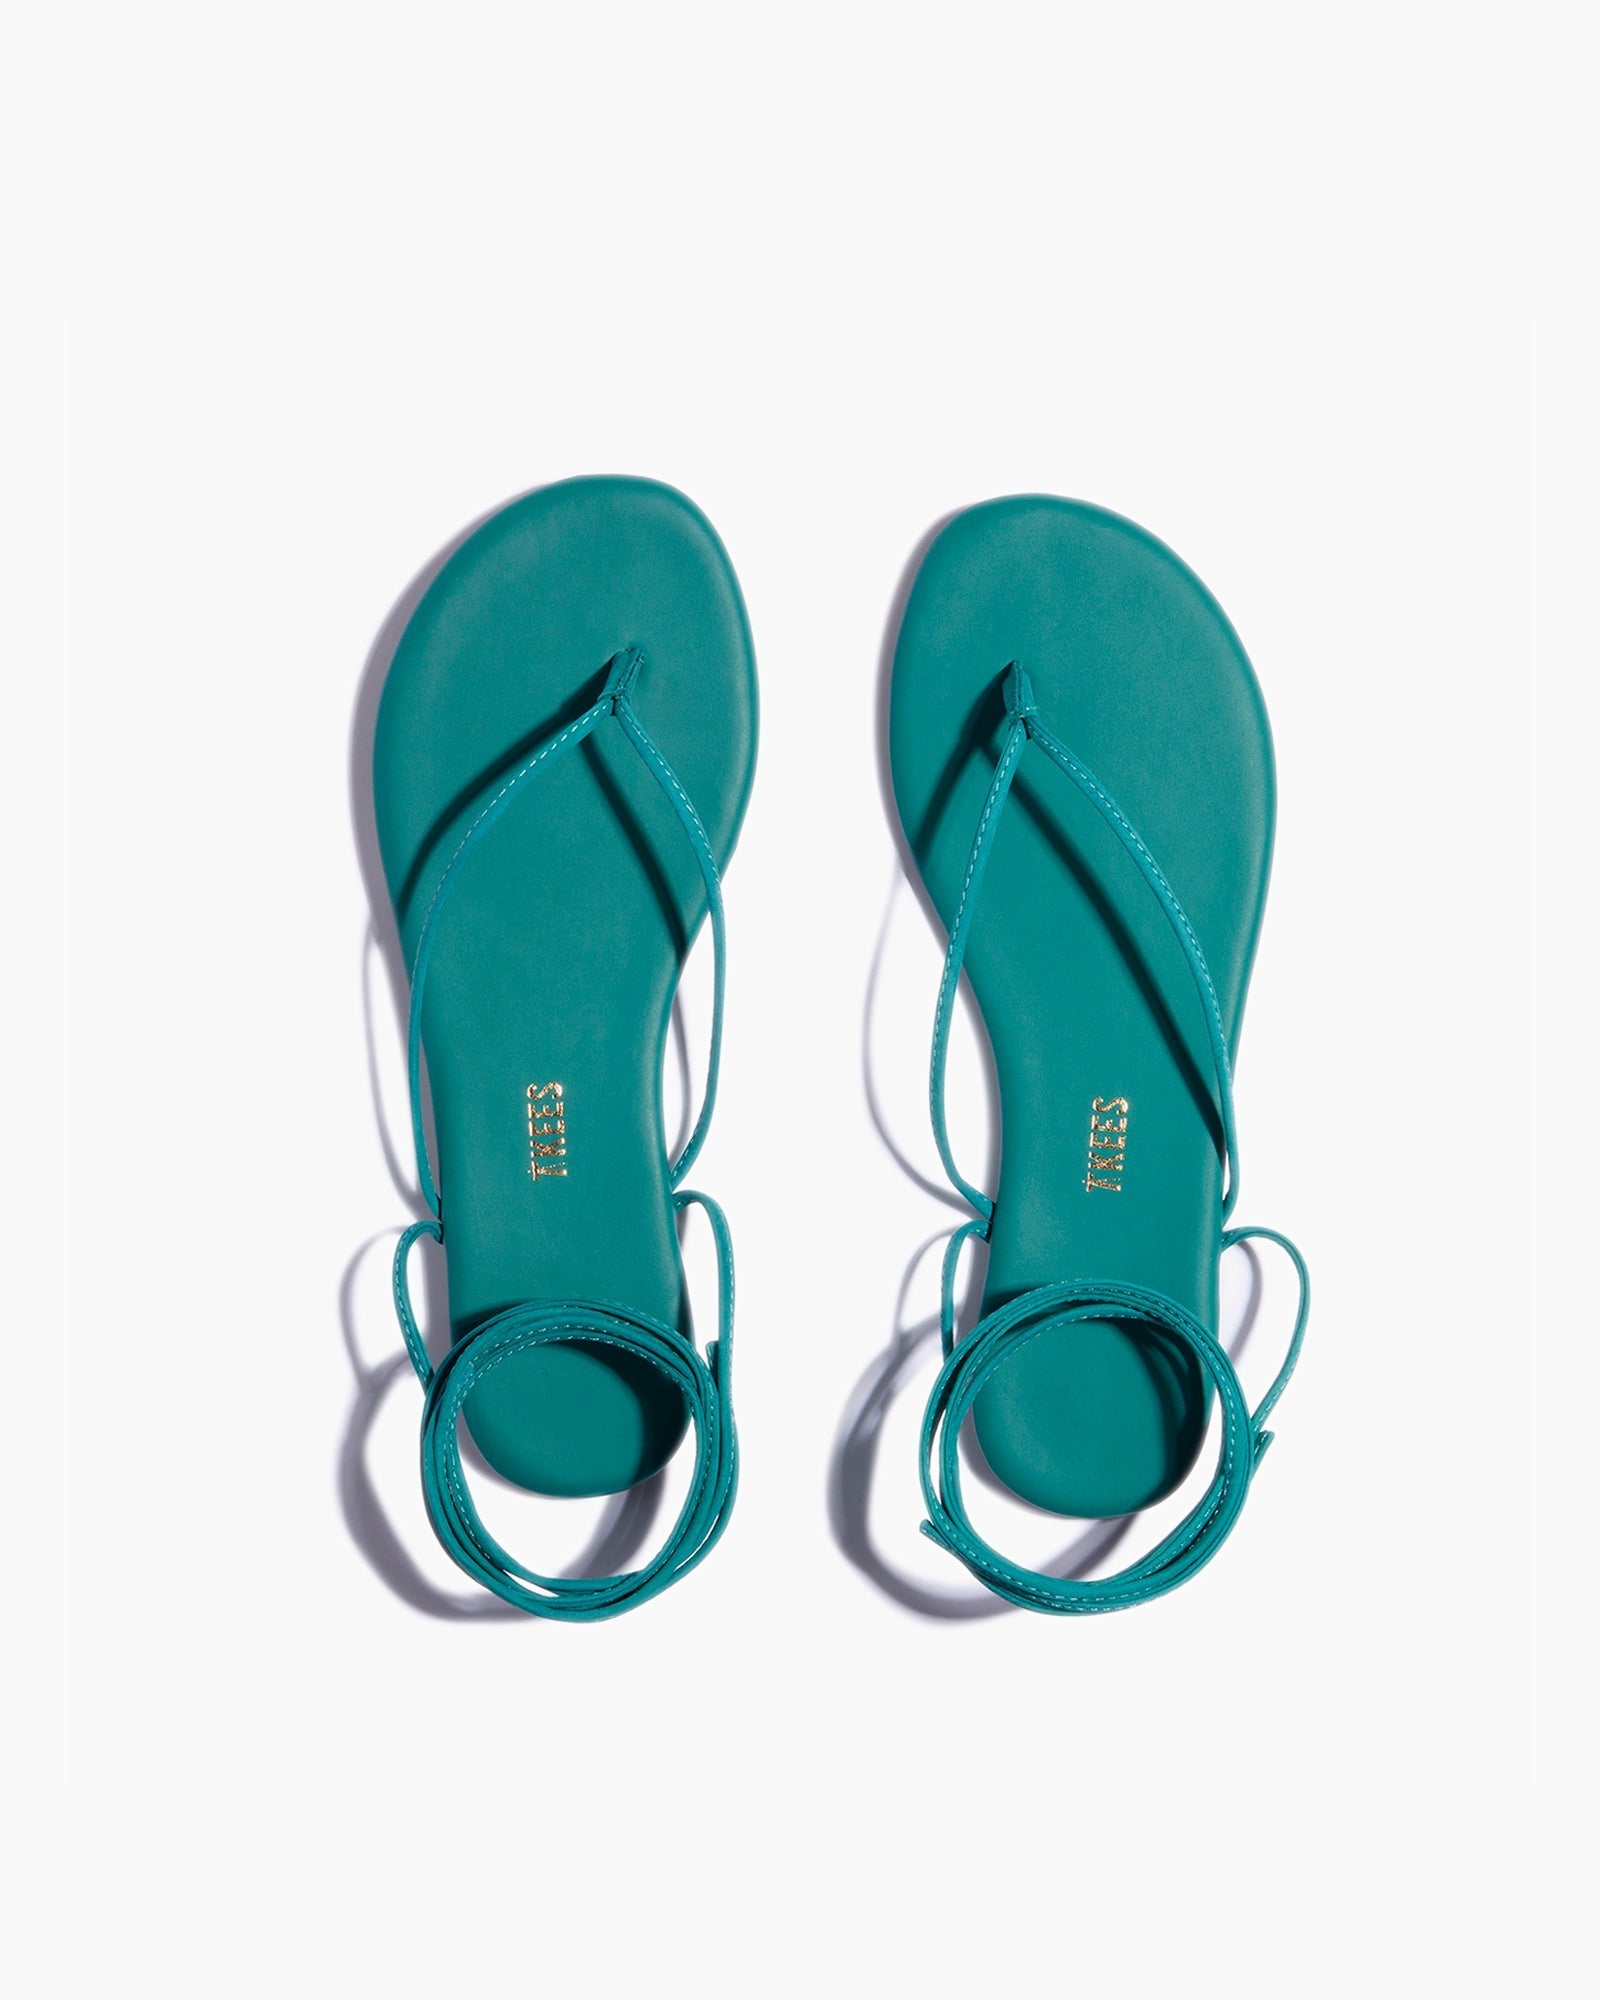 Turquoise Women's TKEES Lilu Pigments Sandals | VPSXBW316